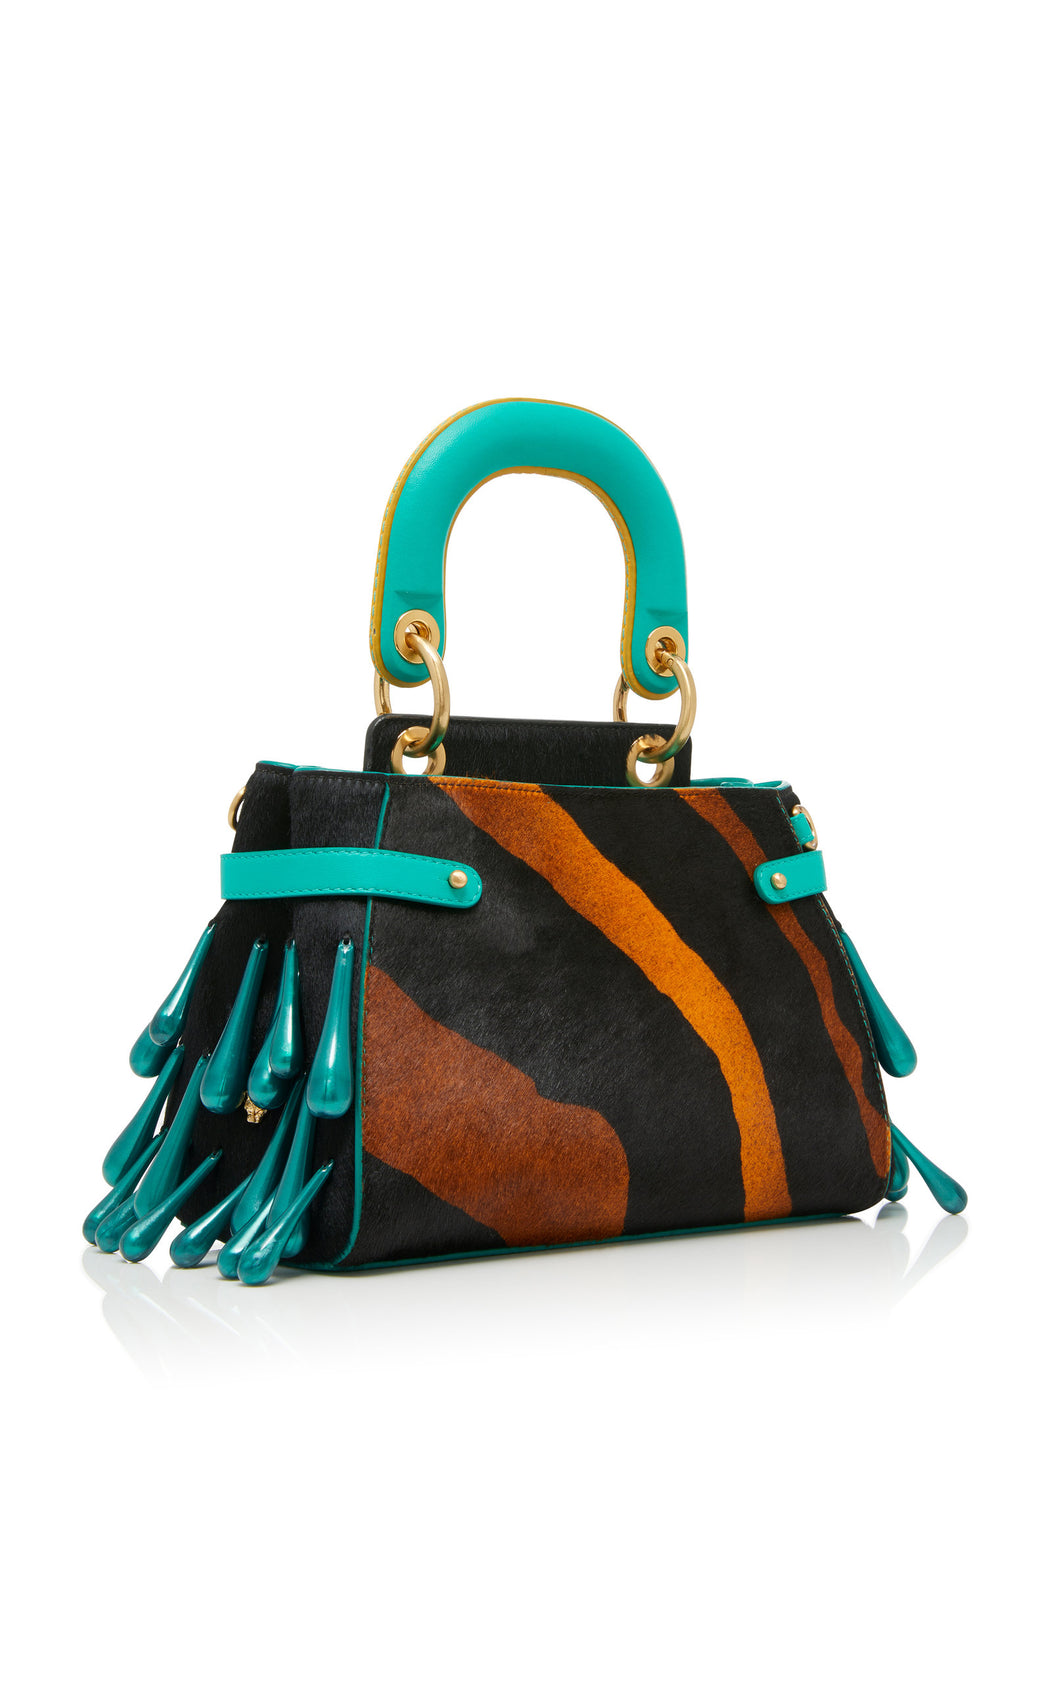 A ladylike luxury frame bag in animal print cavallino with teal nappa leather that fits all the essentials. Comes with a detachable cross-body strap and our special "macaron" top handle. The trapeze bag is embellished with pearlescent resin droplets.